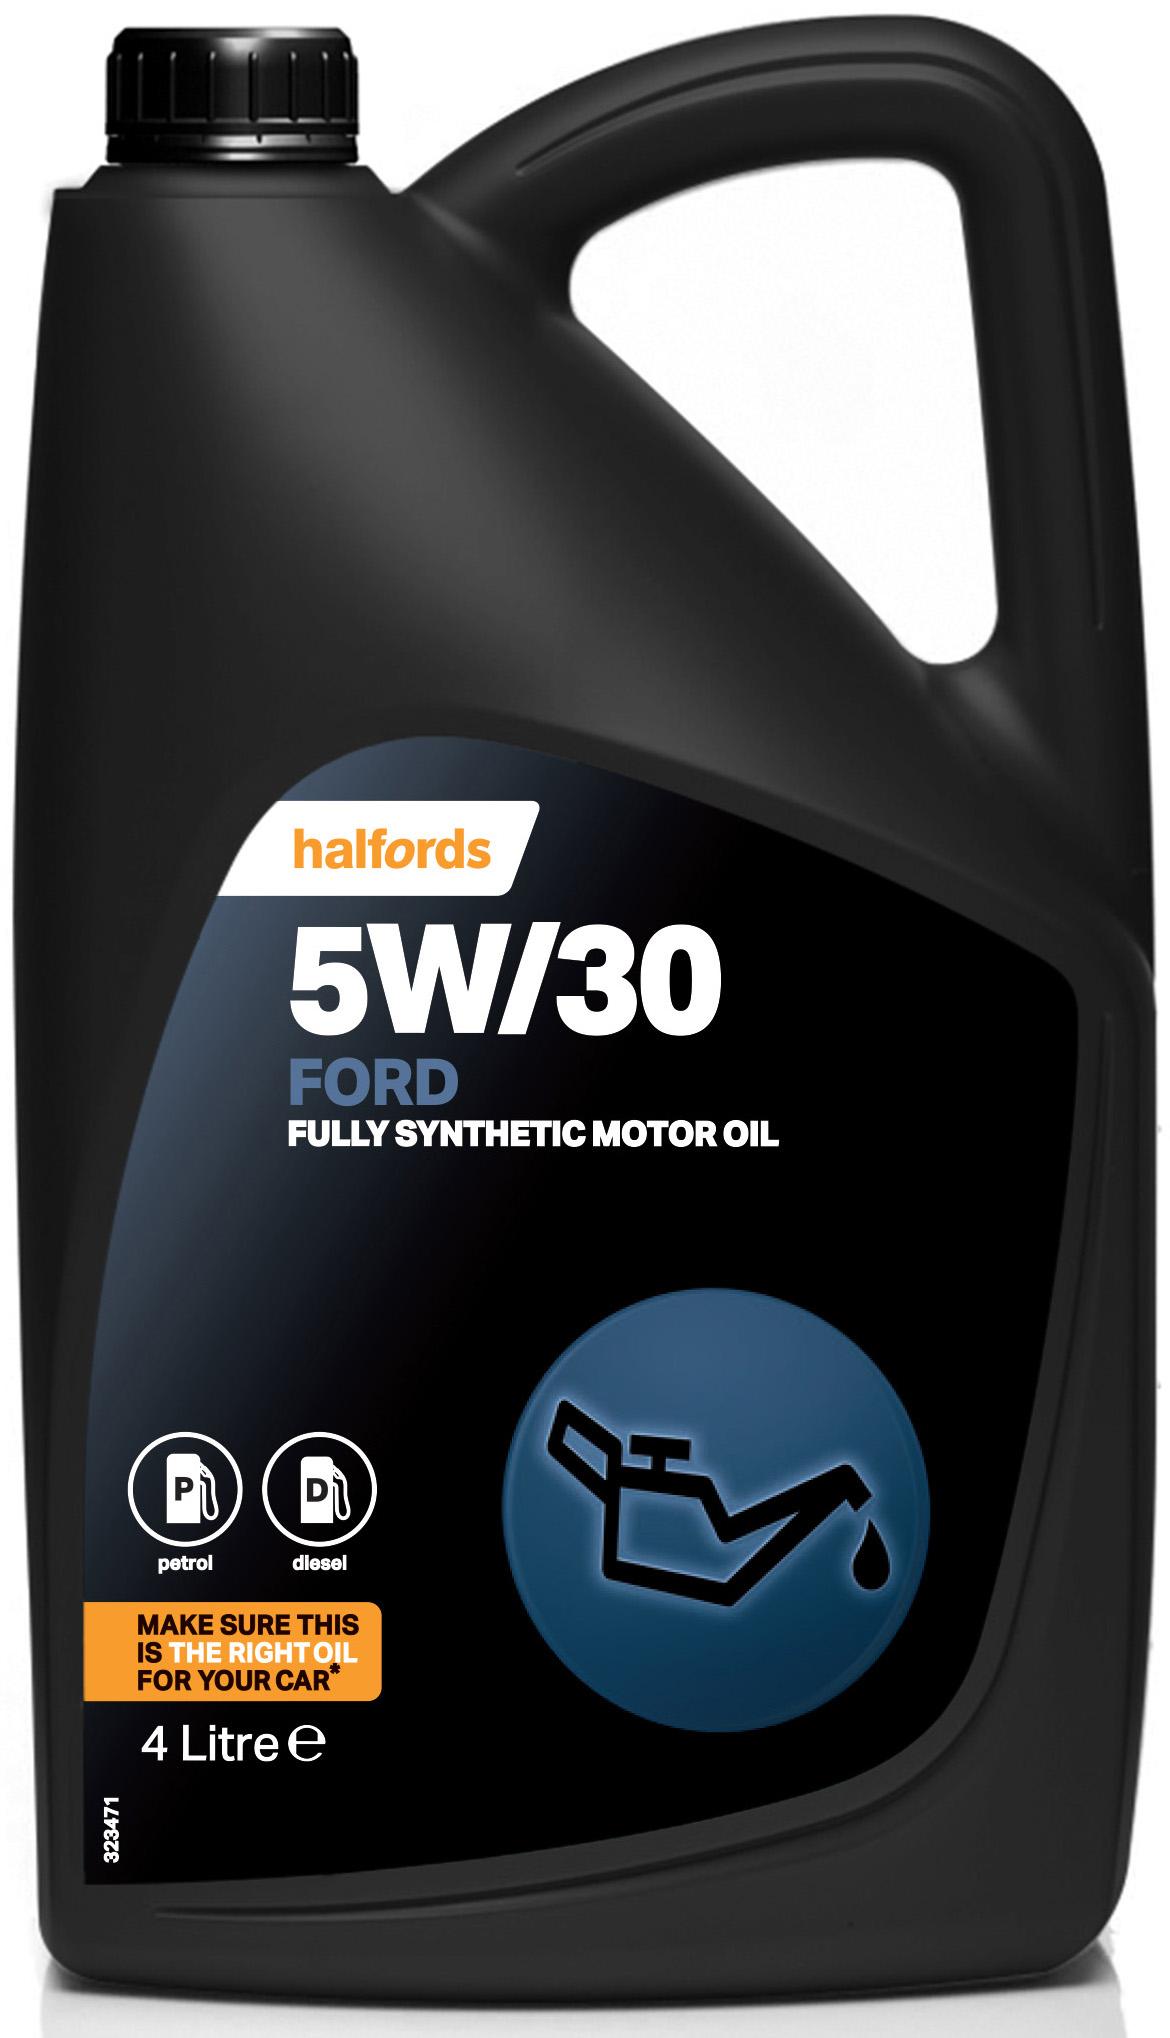 What motor oils meets ford spec. wss-m2c15 #10